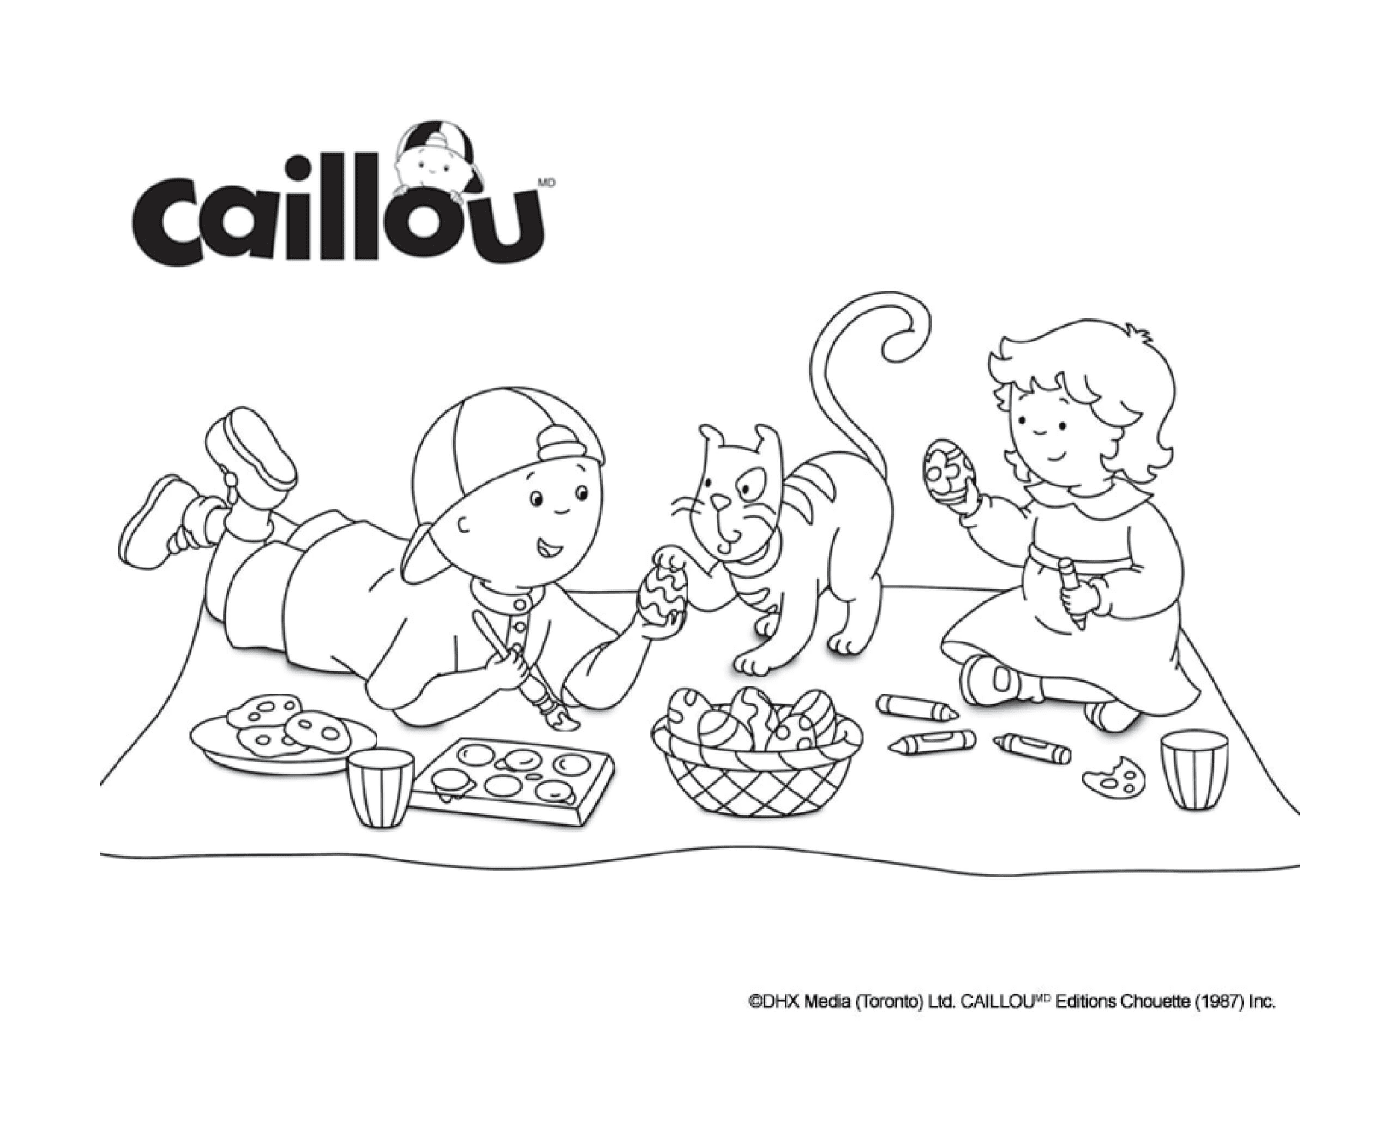  Caillou and Moussline prepare Easter eggs 